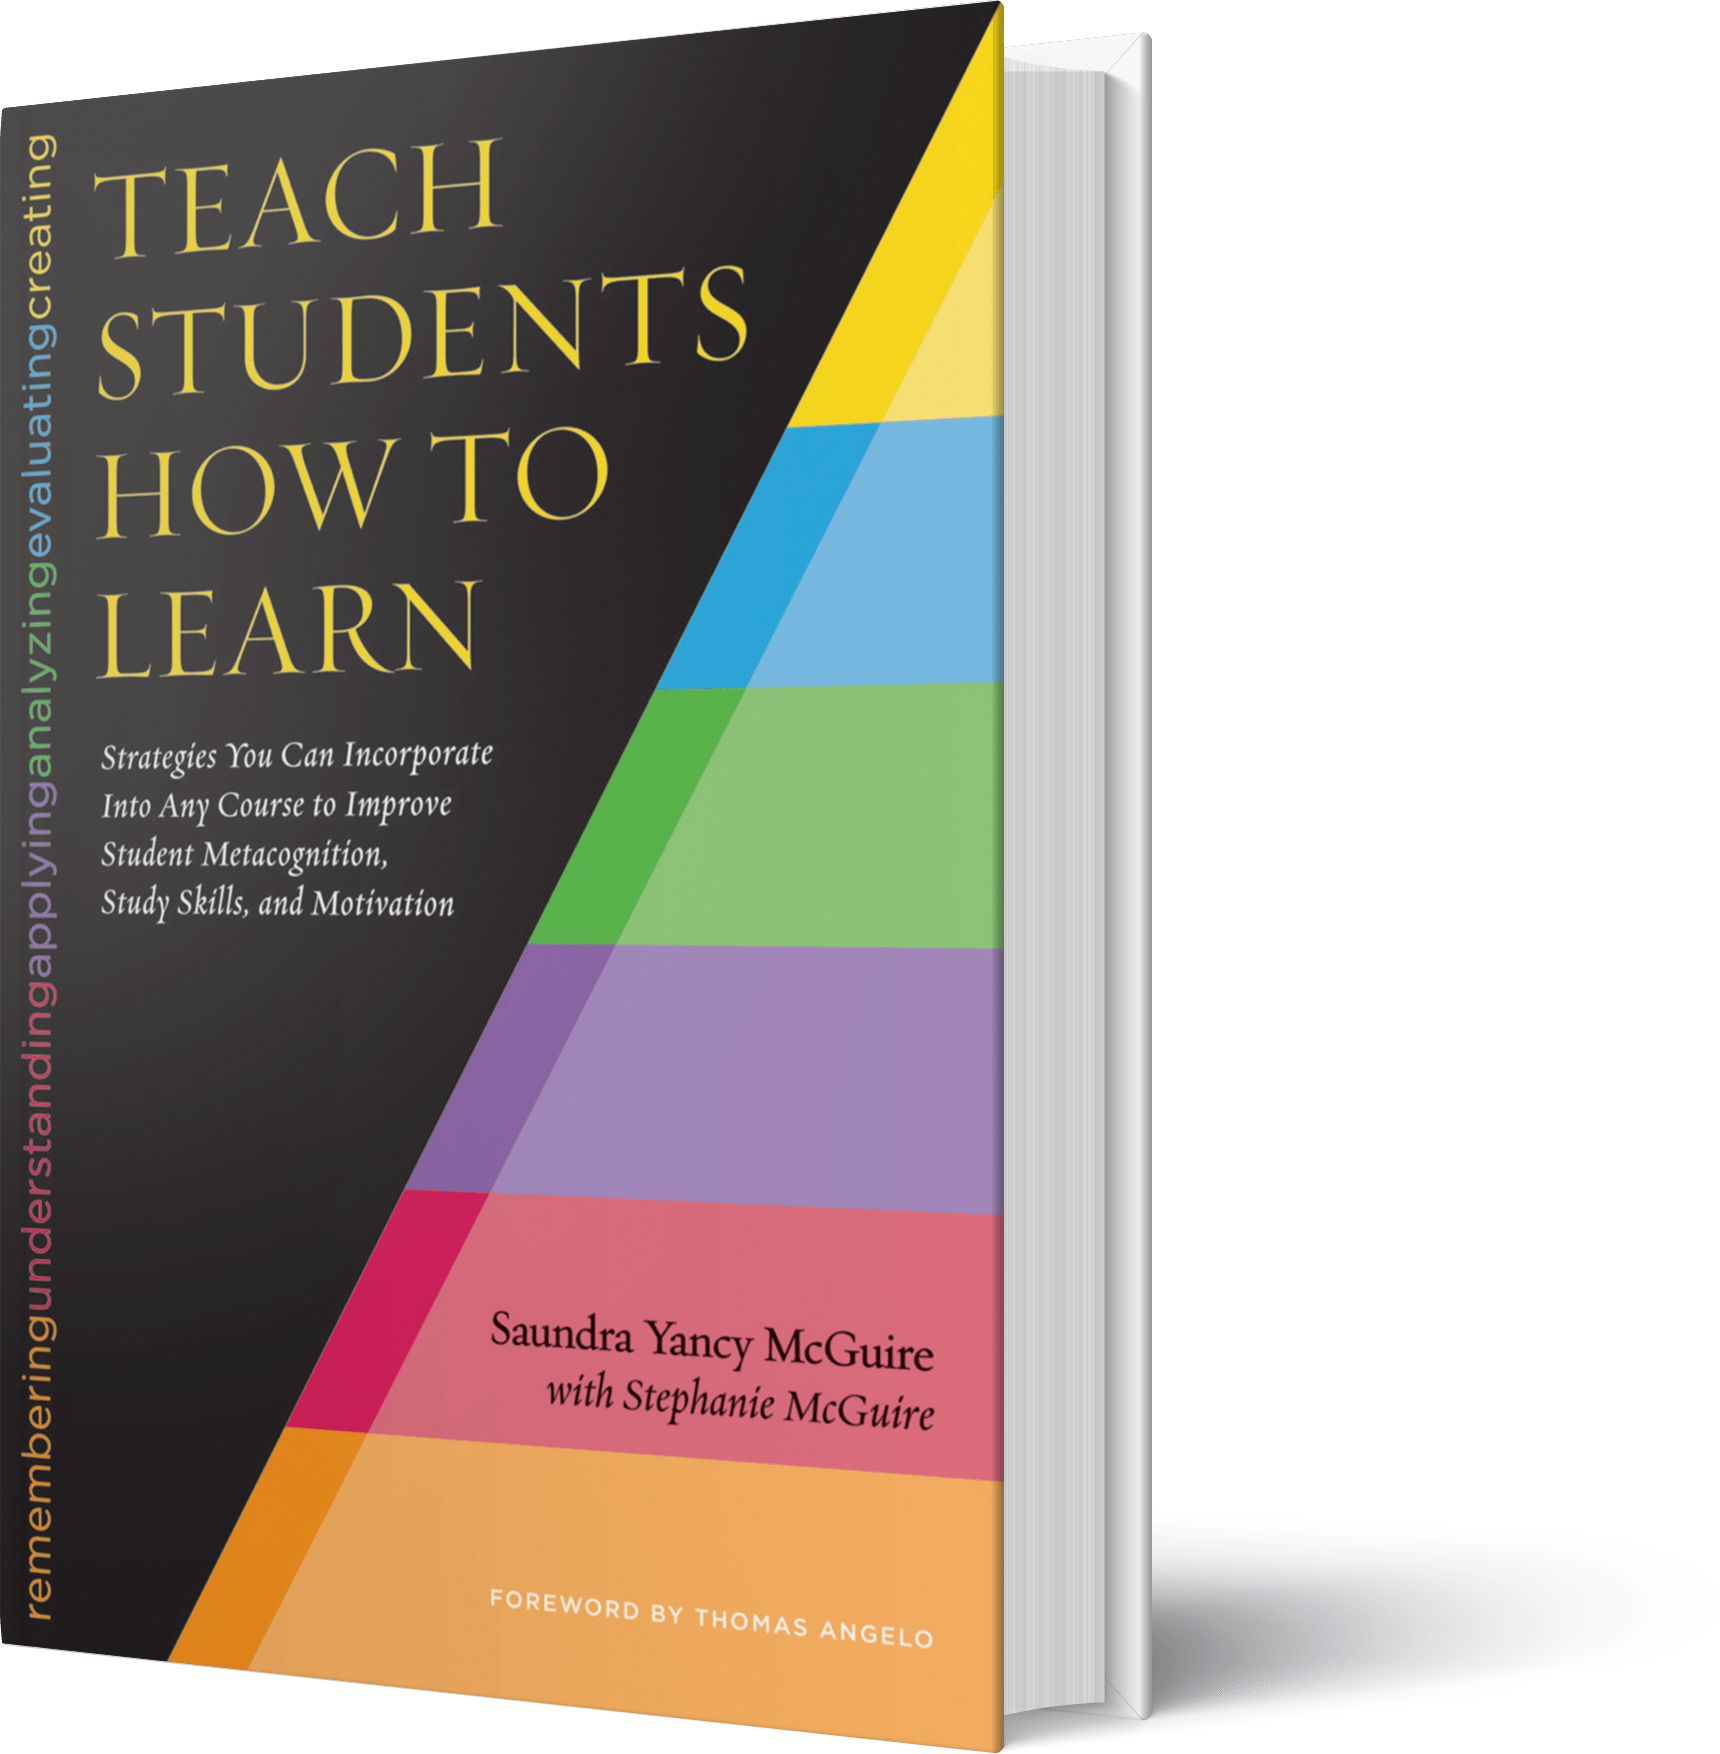 Teach Students How to Learn book